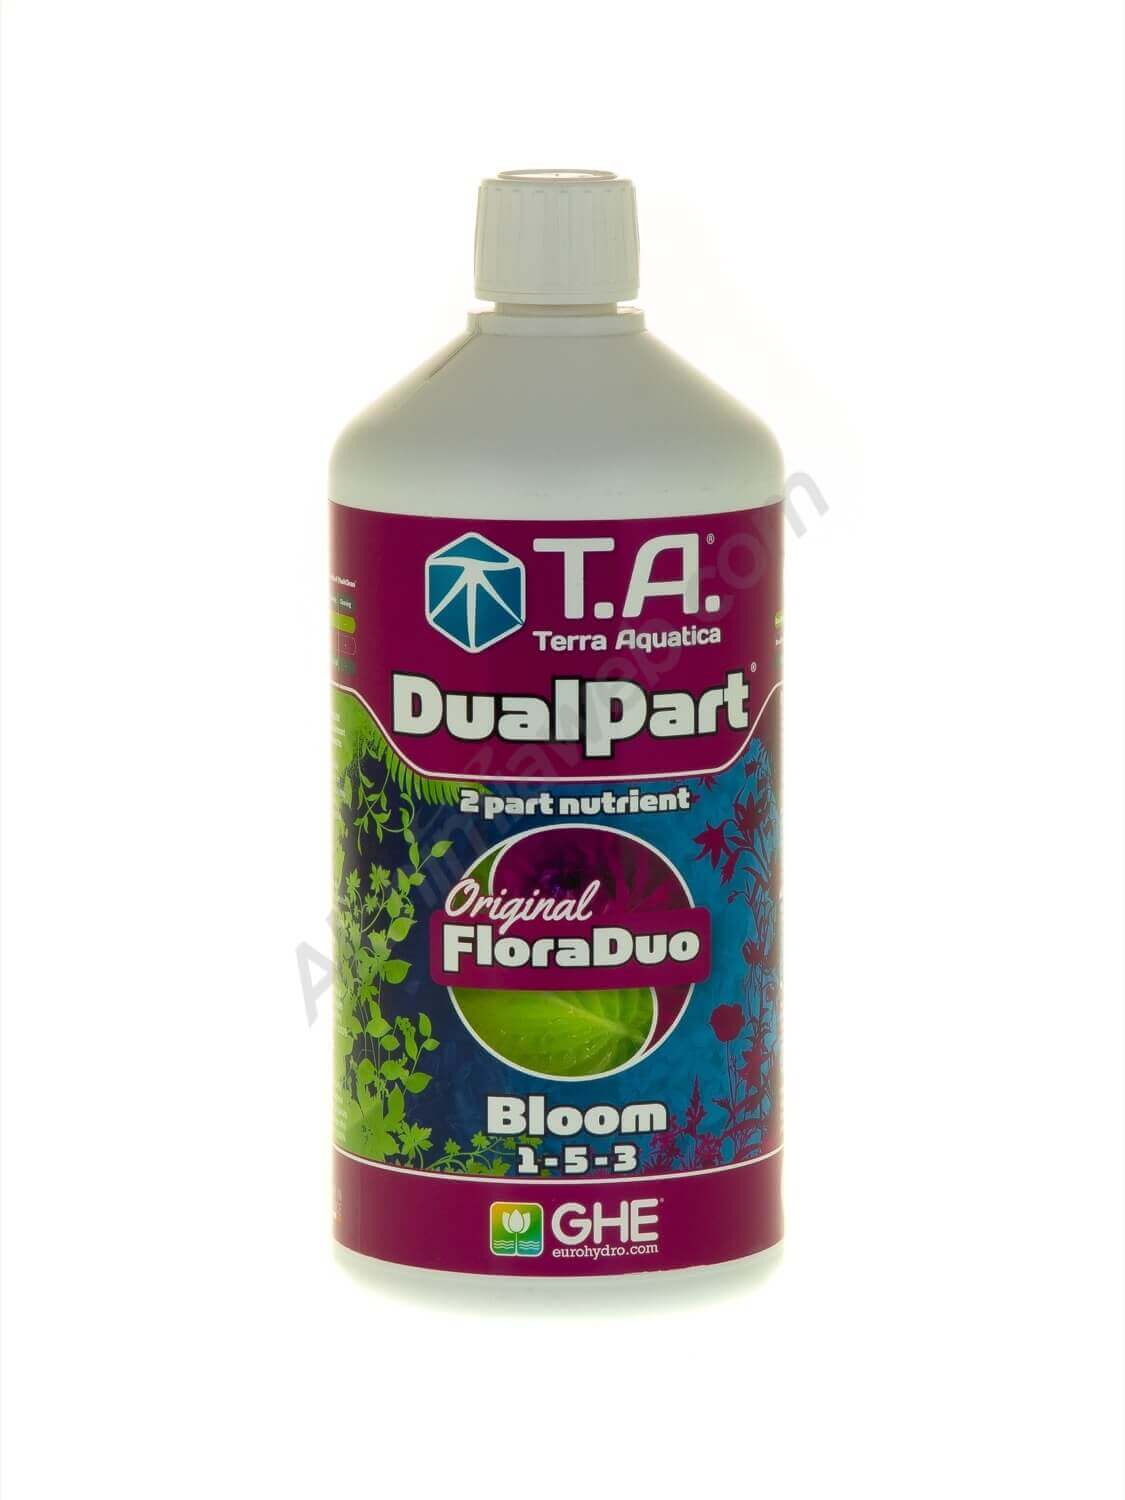 DualPart Bloom by T.A. (formerly GHE's Floraduo® Grow )